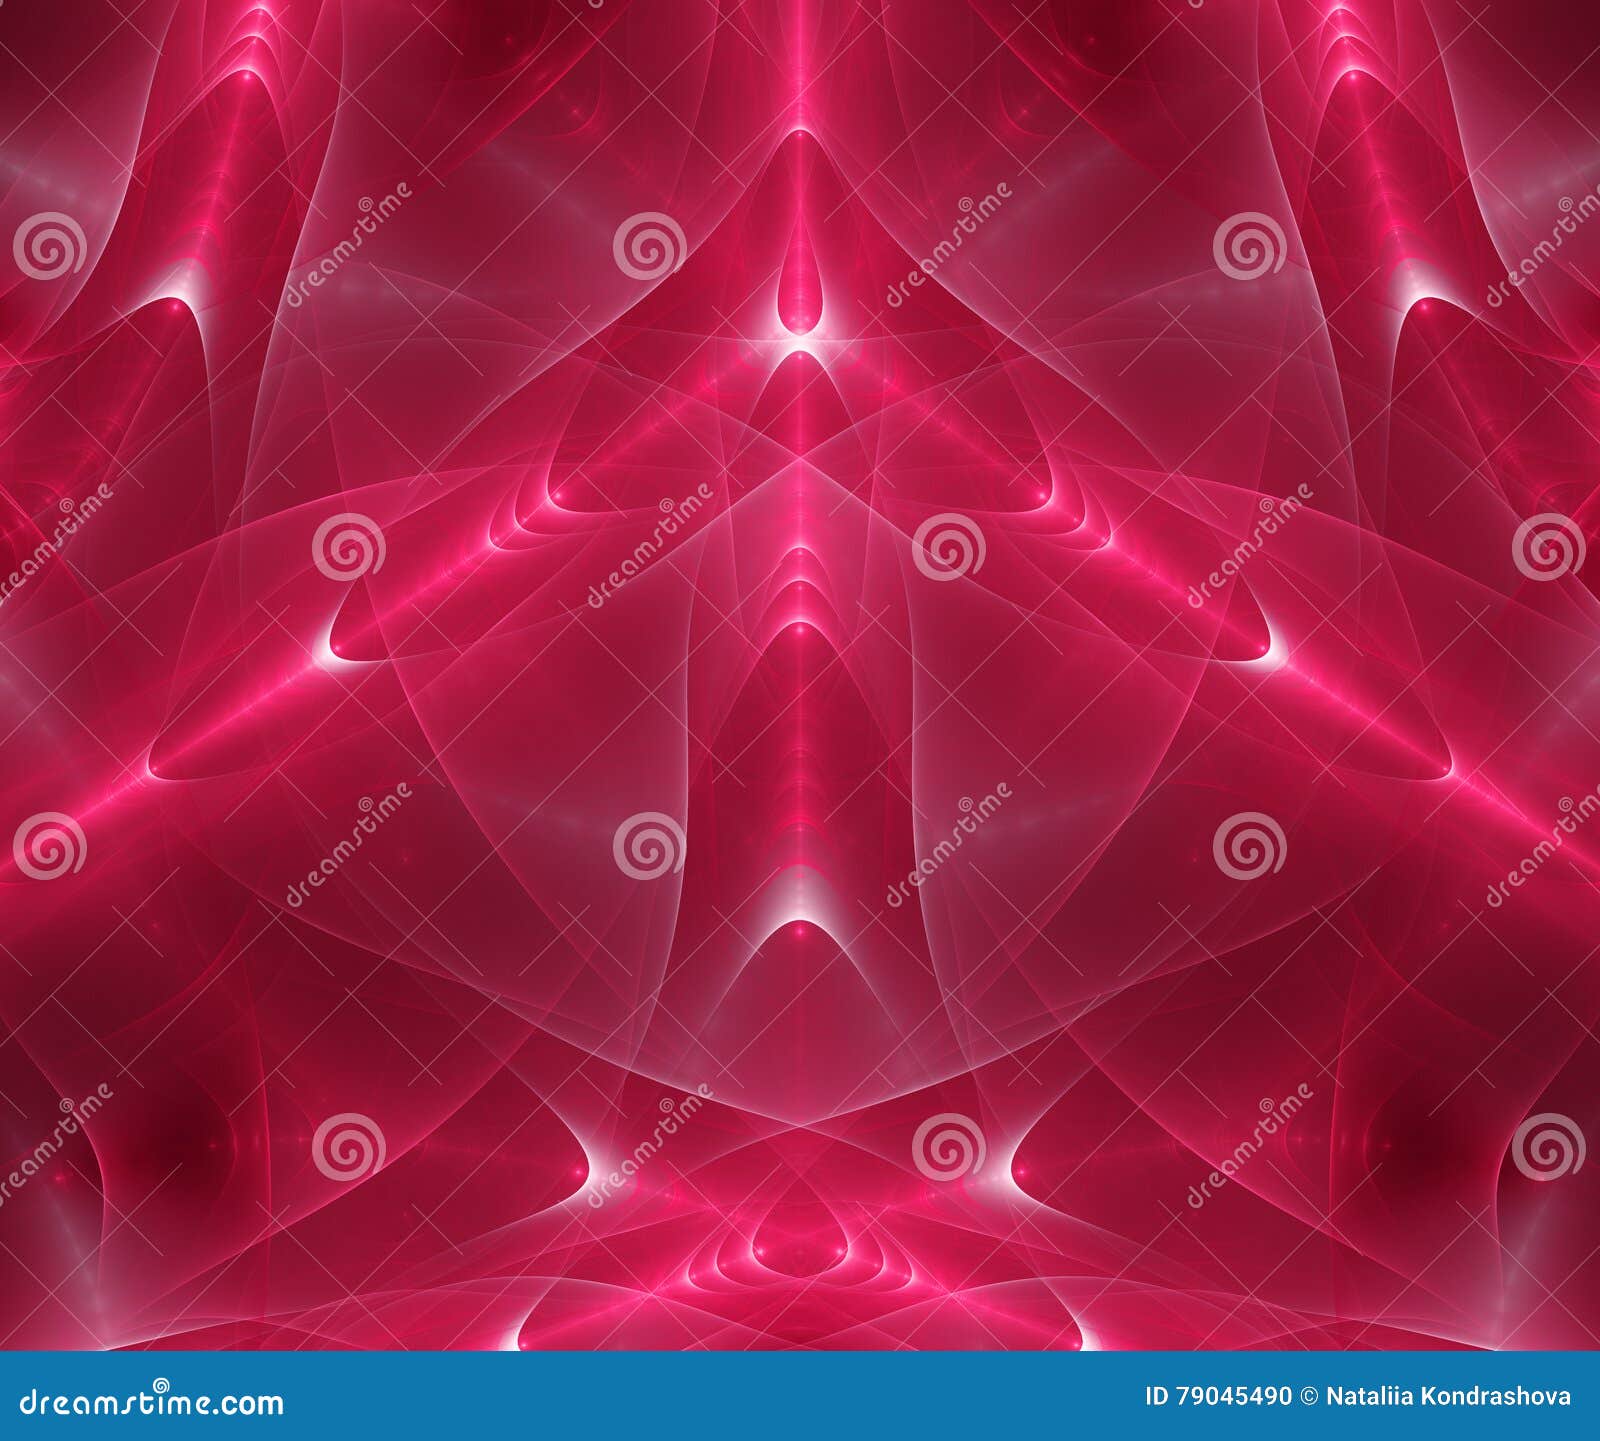 Abstract fractal magic red stock illustration. Illustration of ...